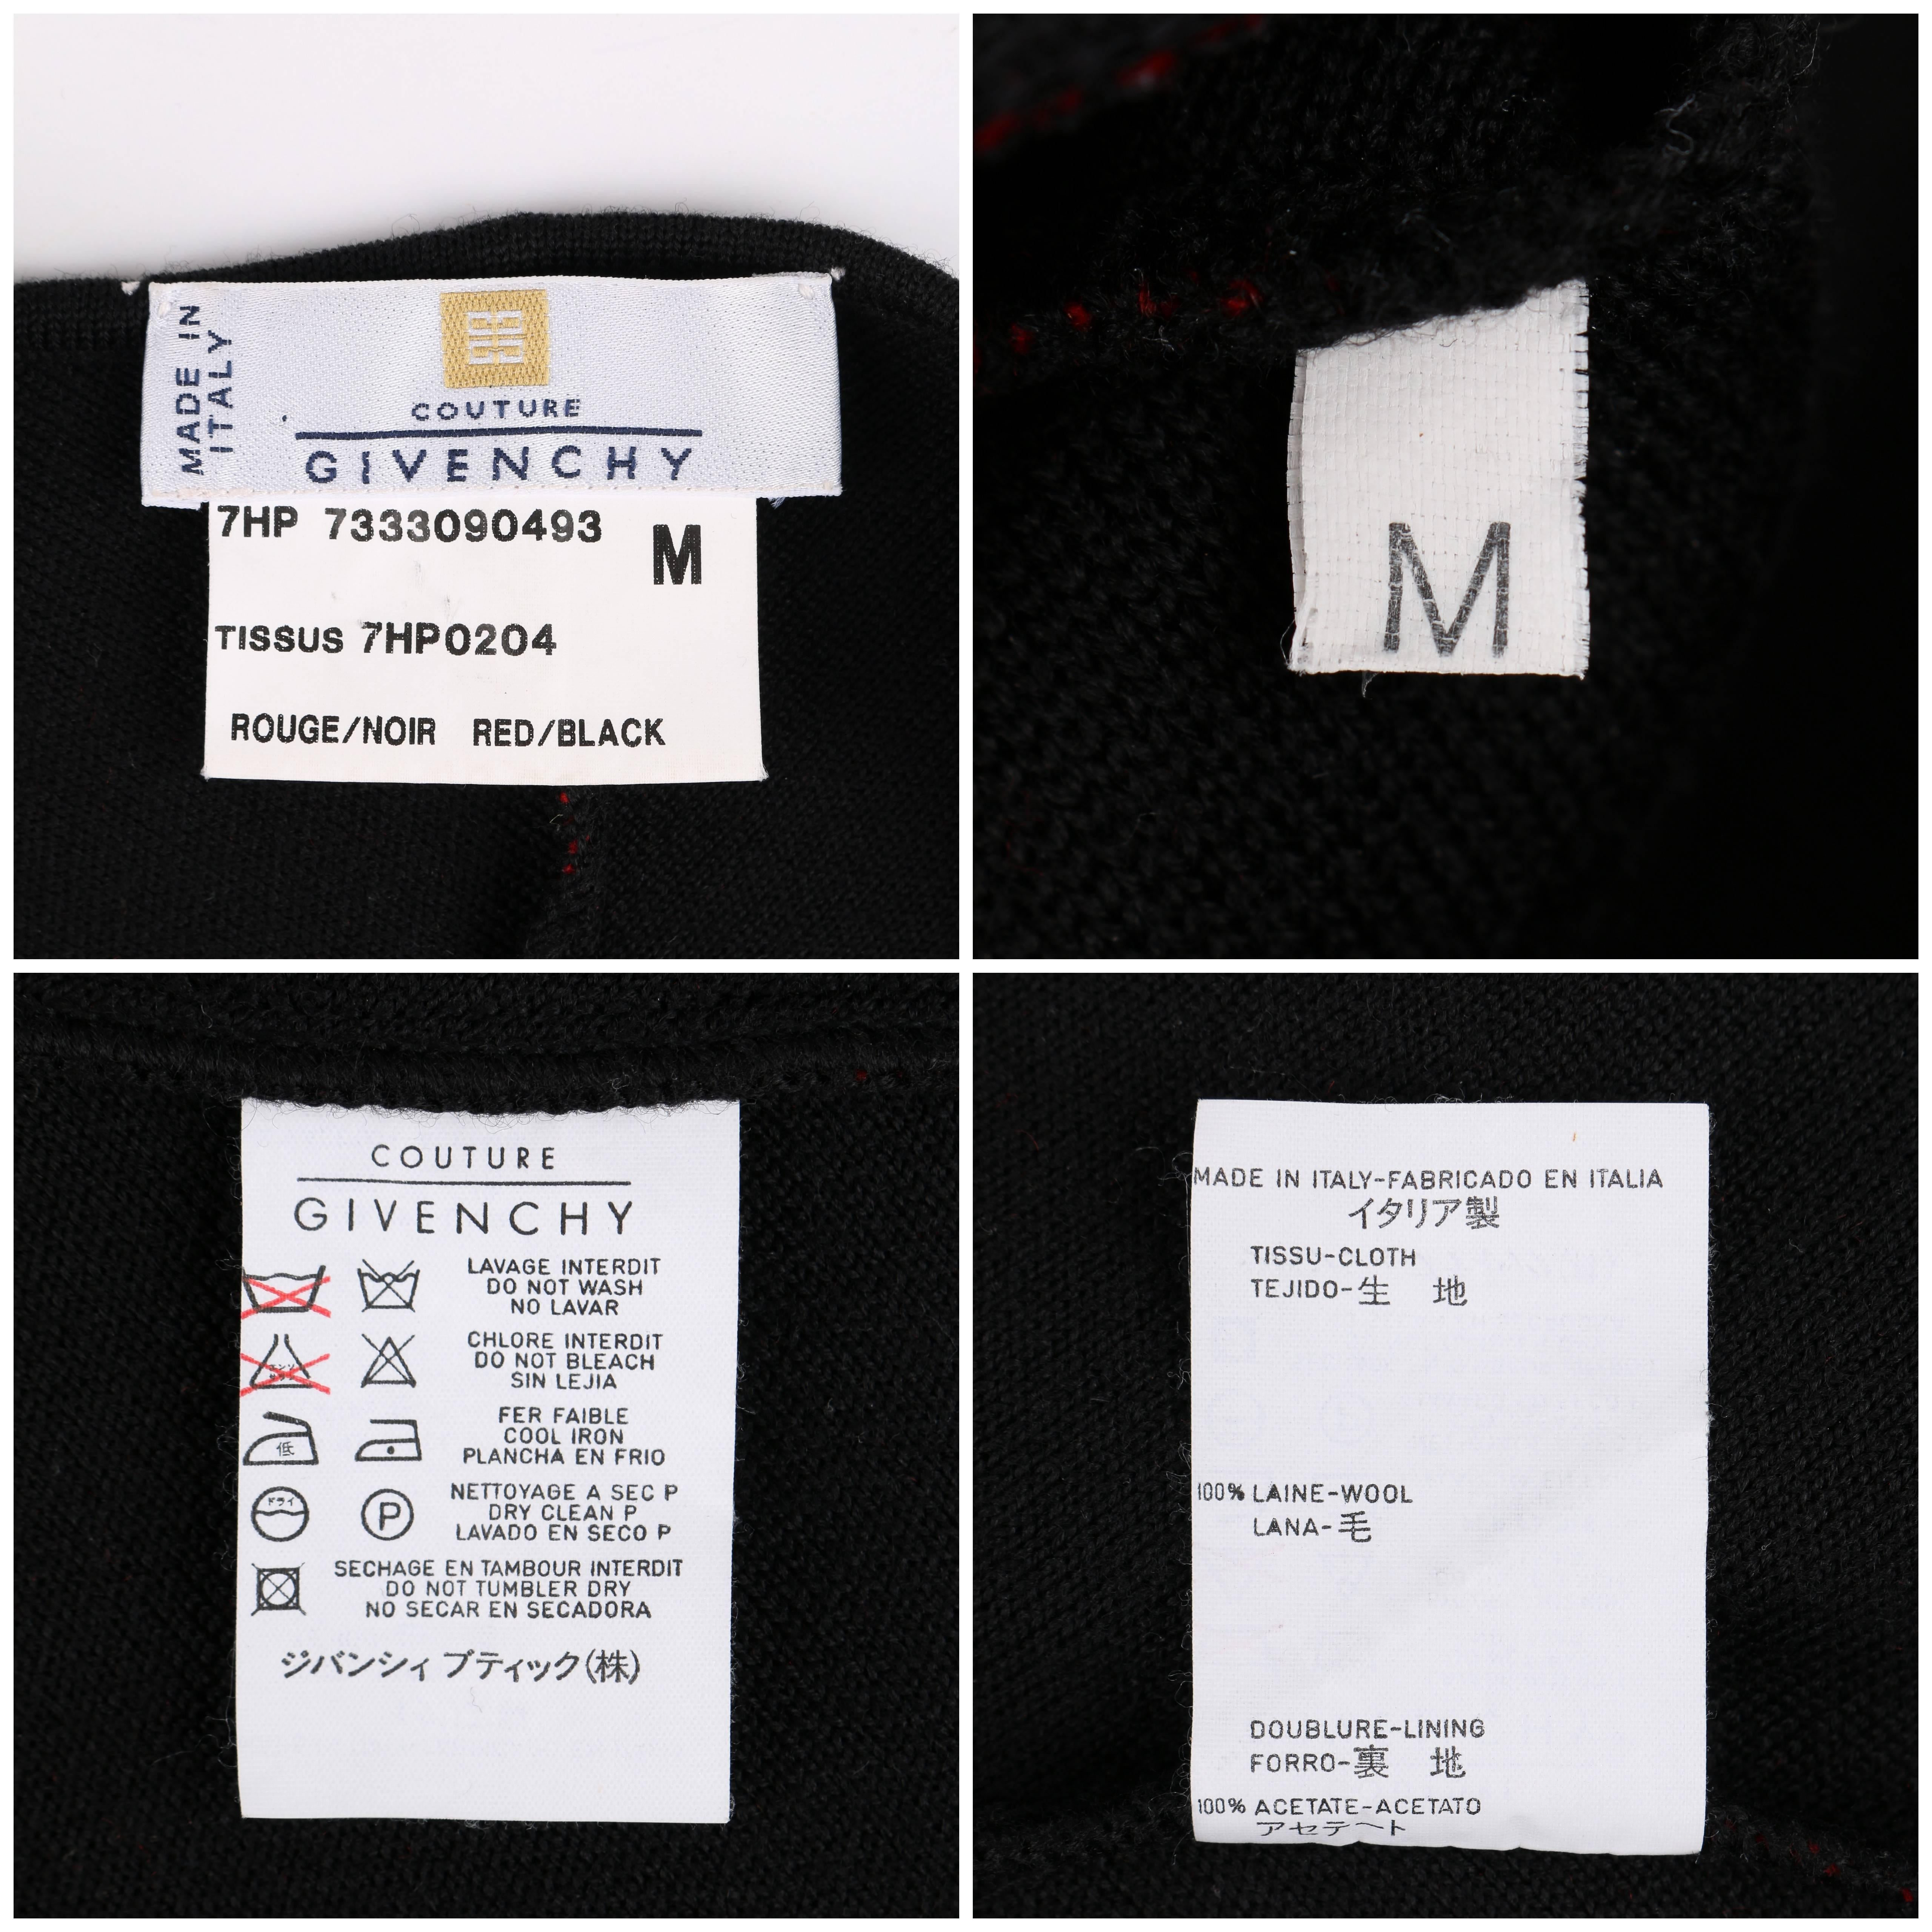 GIVENCHY COUTURE A/W 1998 ALEXANDER McQUEEN Black Red Stripe Wool Knit Blazer  For Sale 2